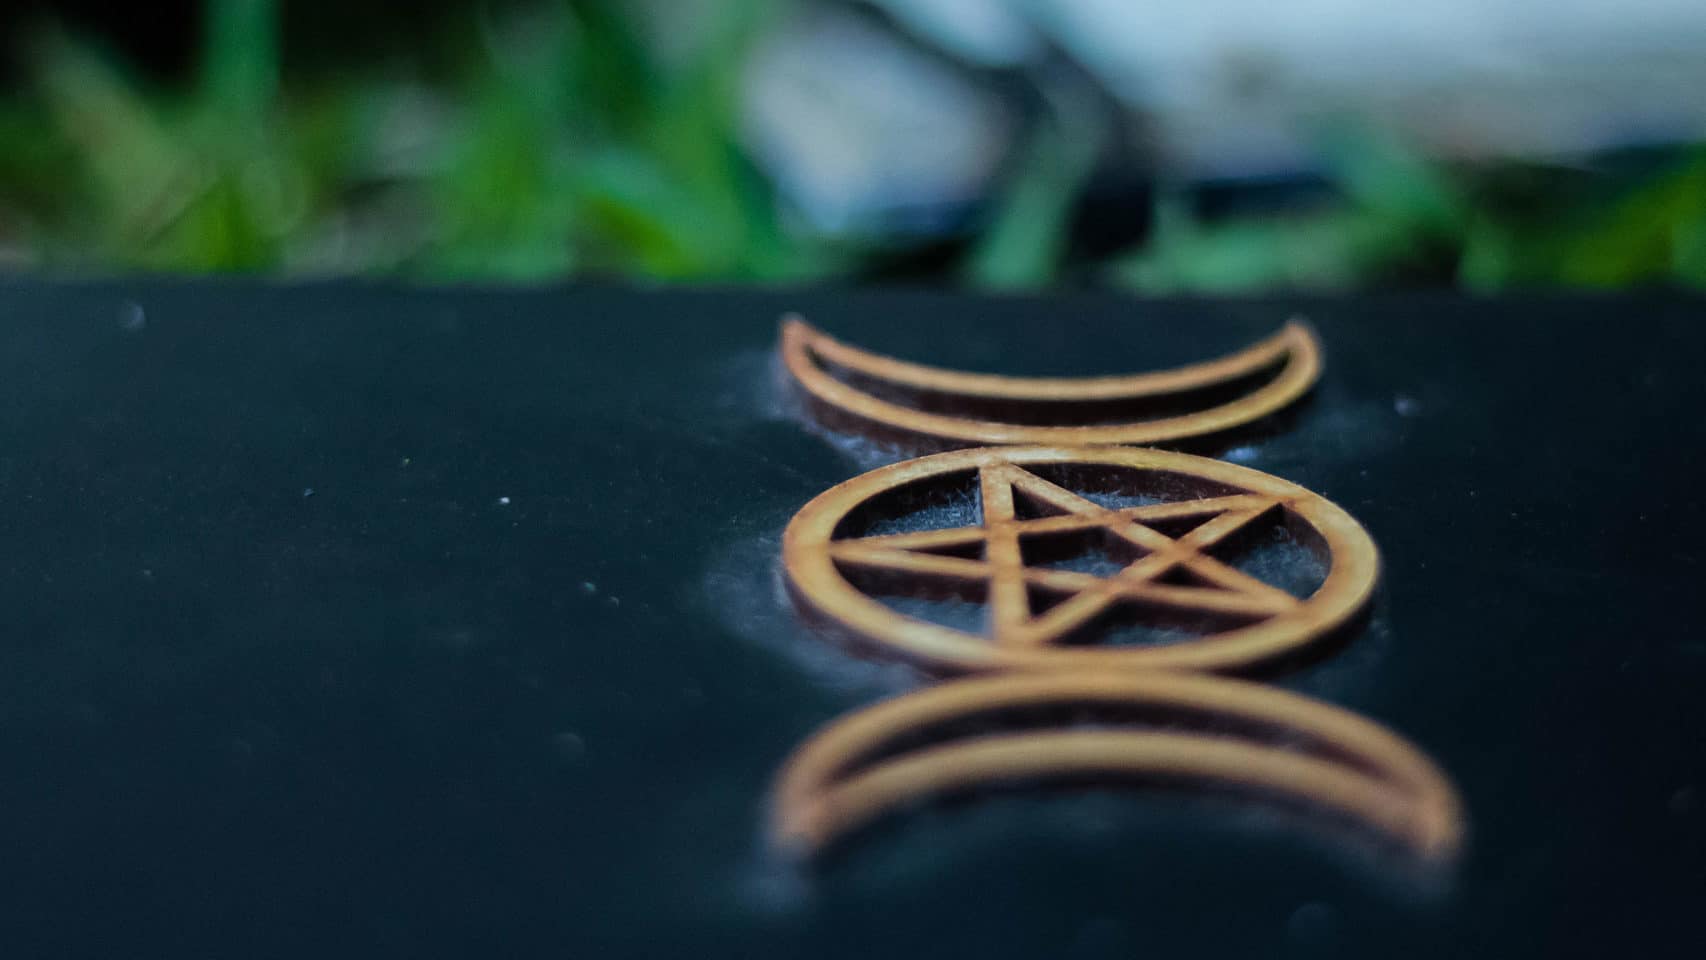 A symbol often associated with the occult and witchy practices, a wooden pentacle interlaced with a crescent moon, rests on a dark surface against a blurry green background.